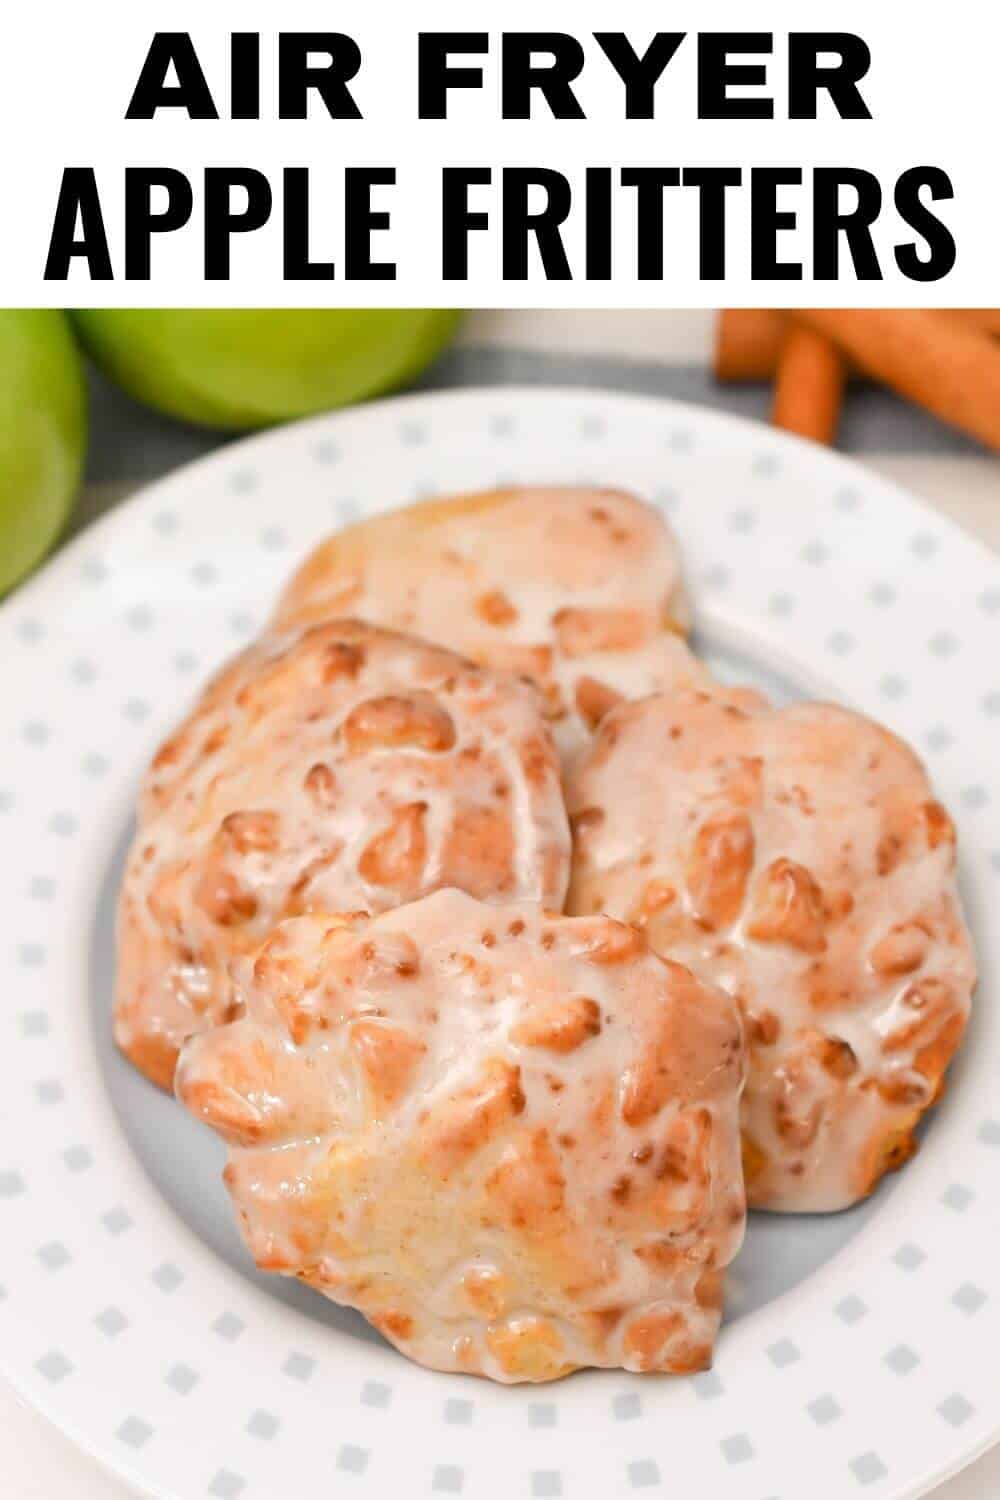 Air fryer apple fritters plated.